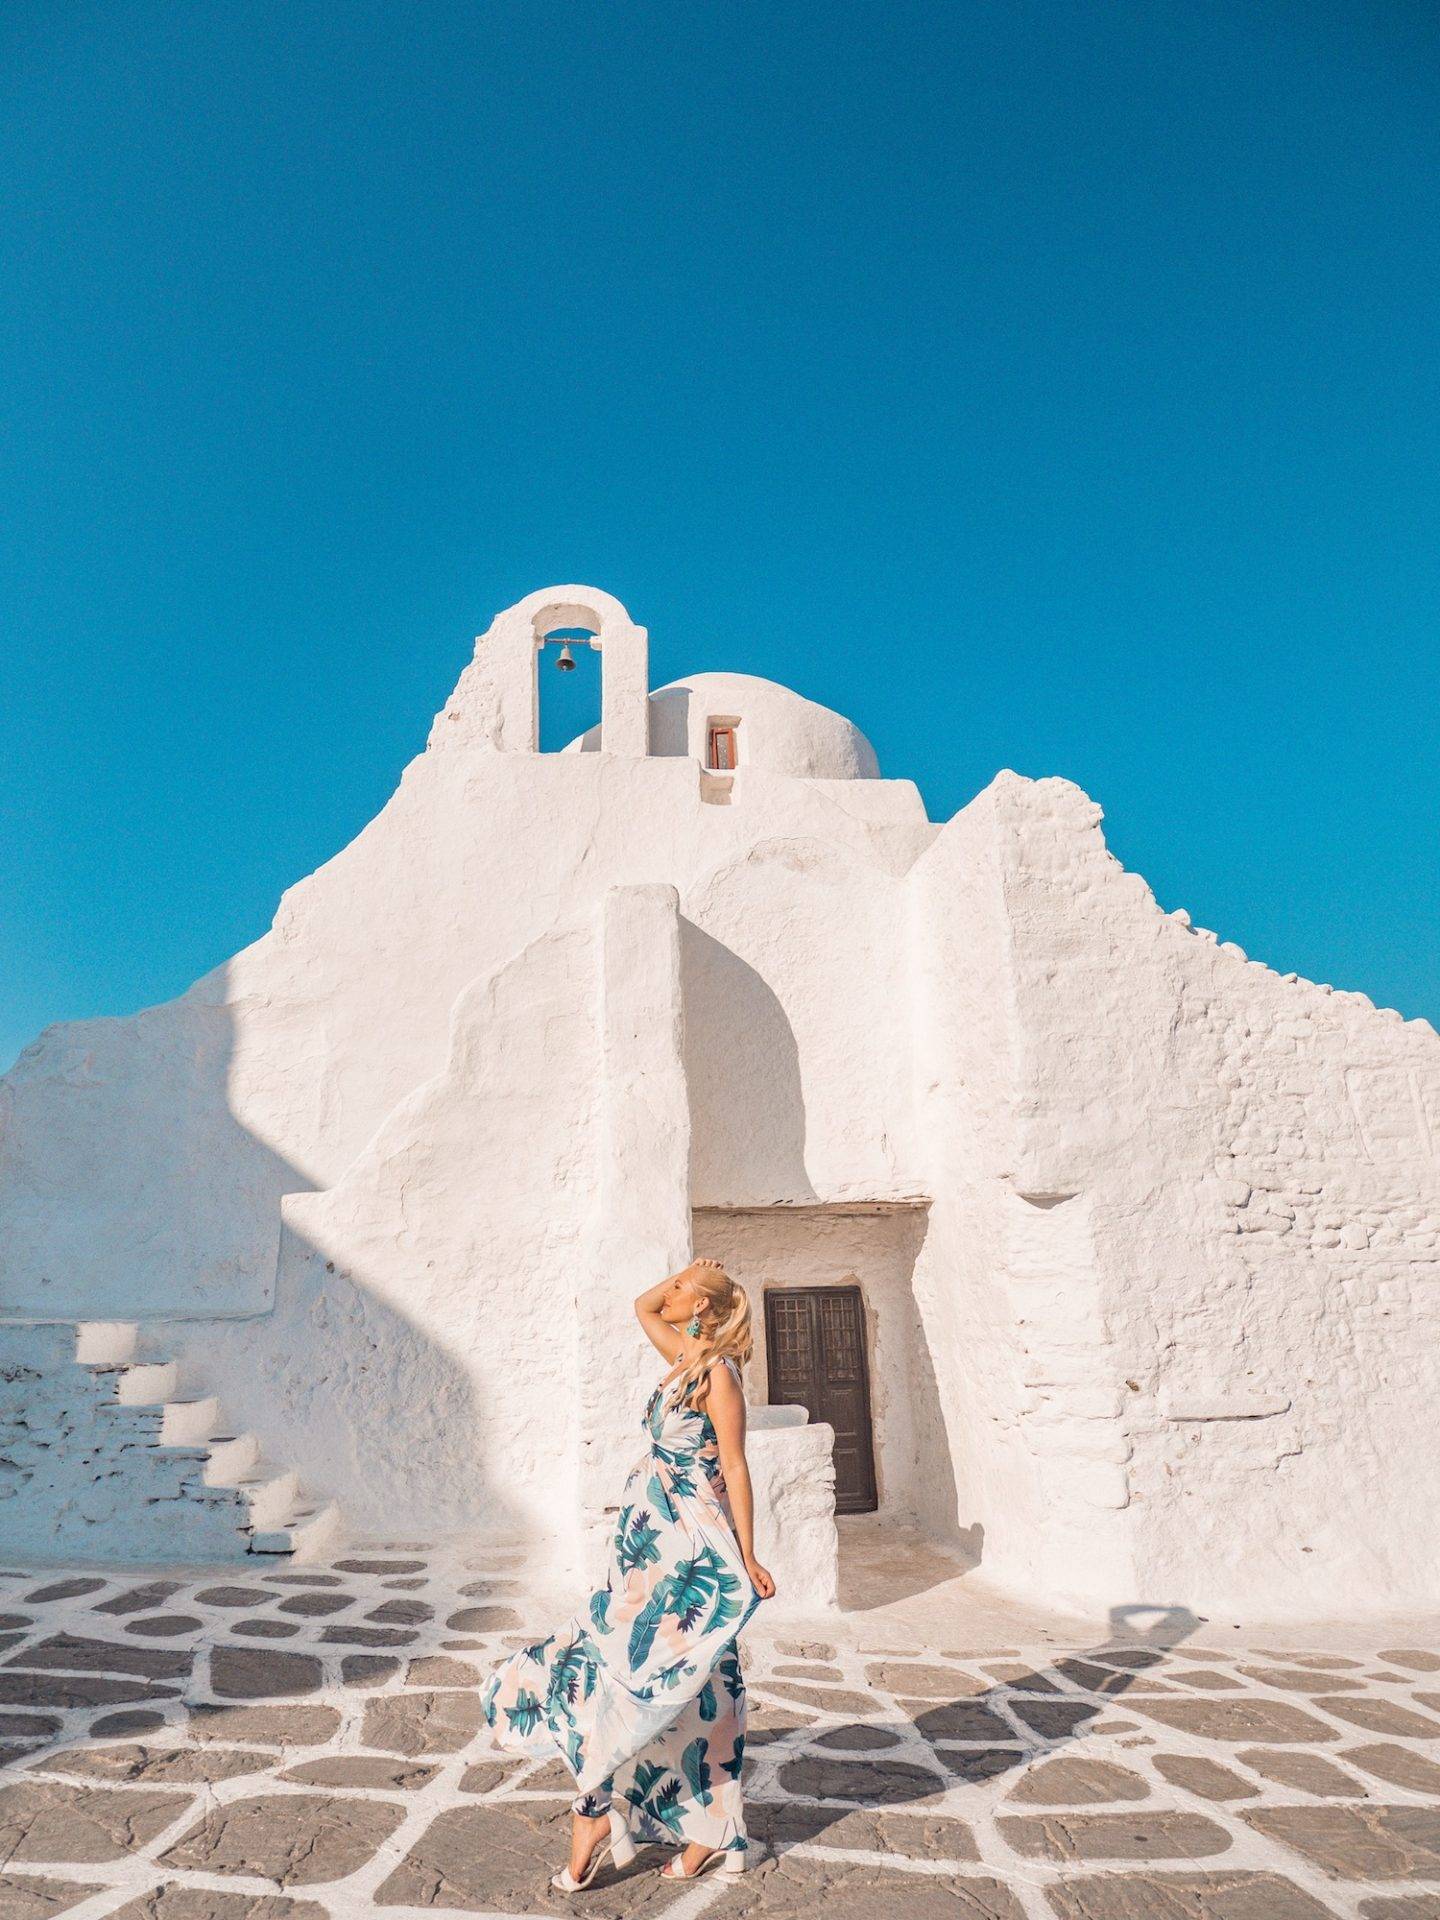 Paraportiani Church - one of the most instagrammable places in Mykonos. Click the photo to see the rest of my list of the most instagrammable places in Mykonos! 